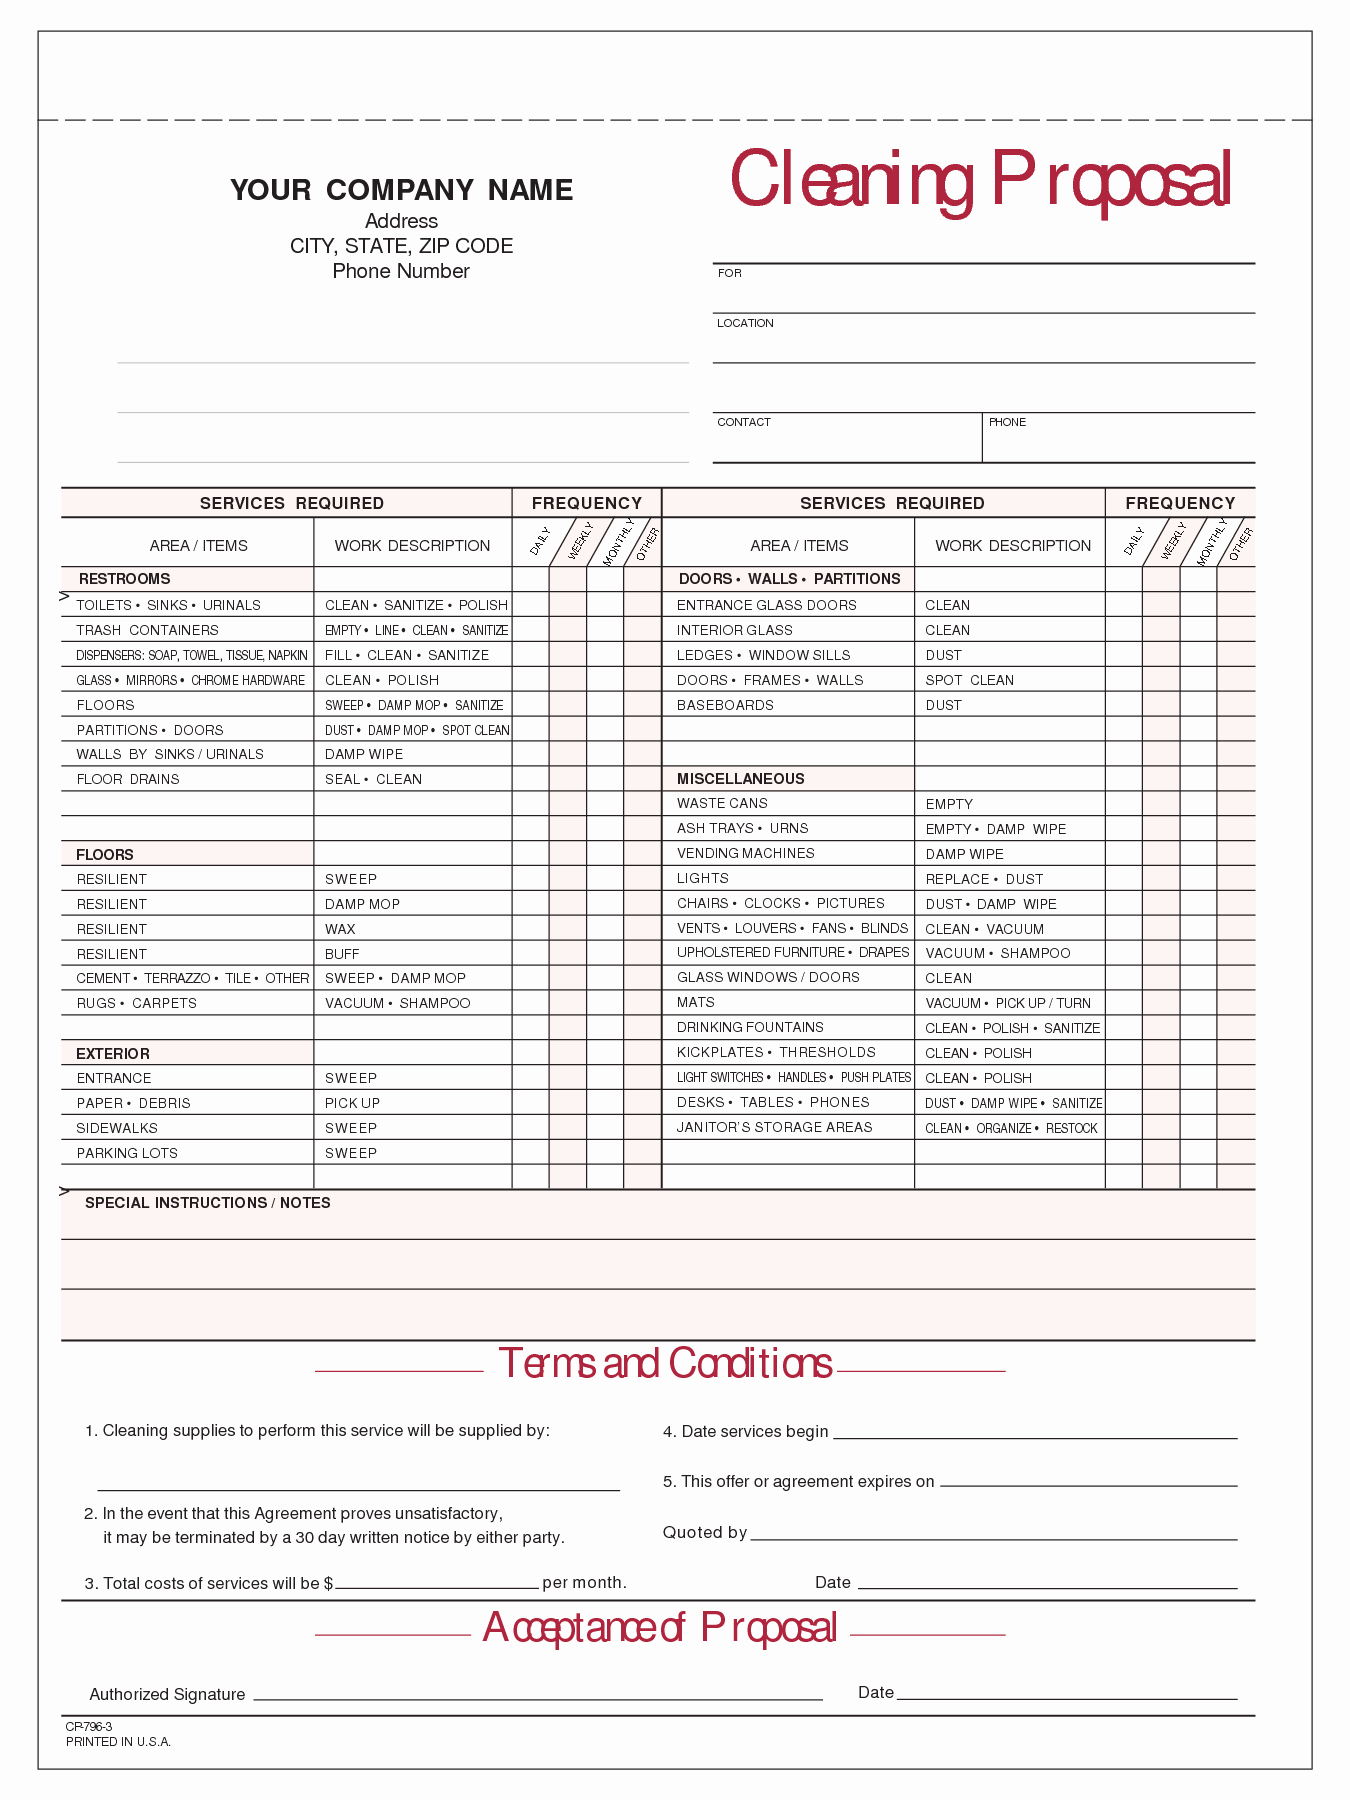 Cleaning Service Checklist Template Fresh Janitorial Cleaning Proposal Templates